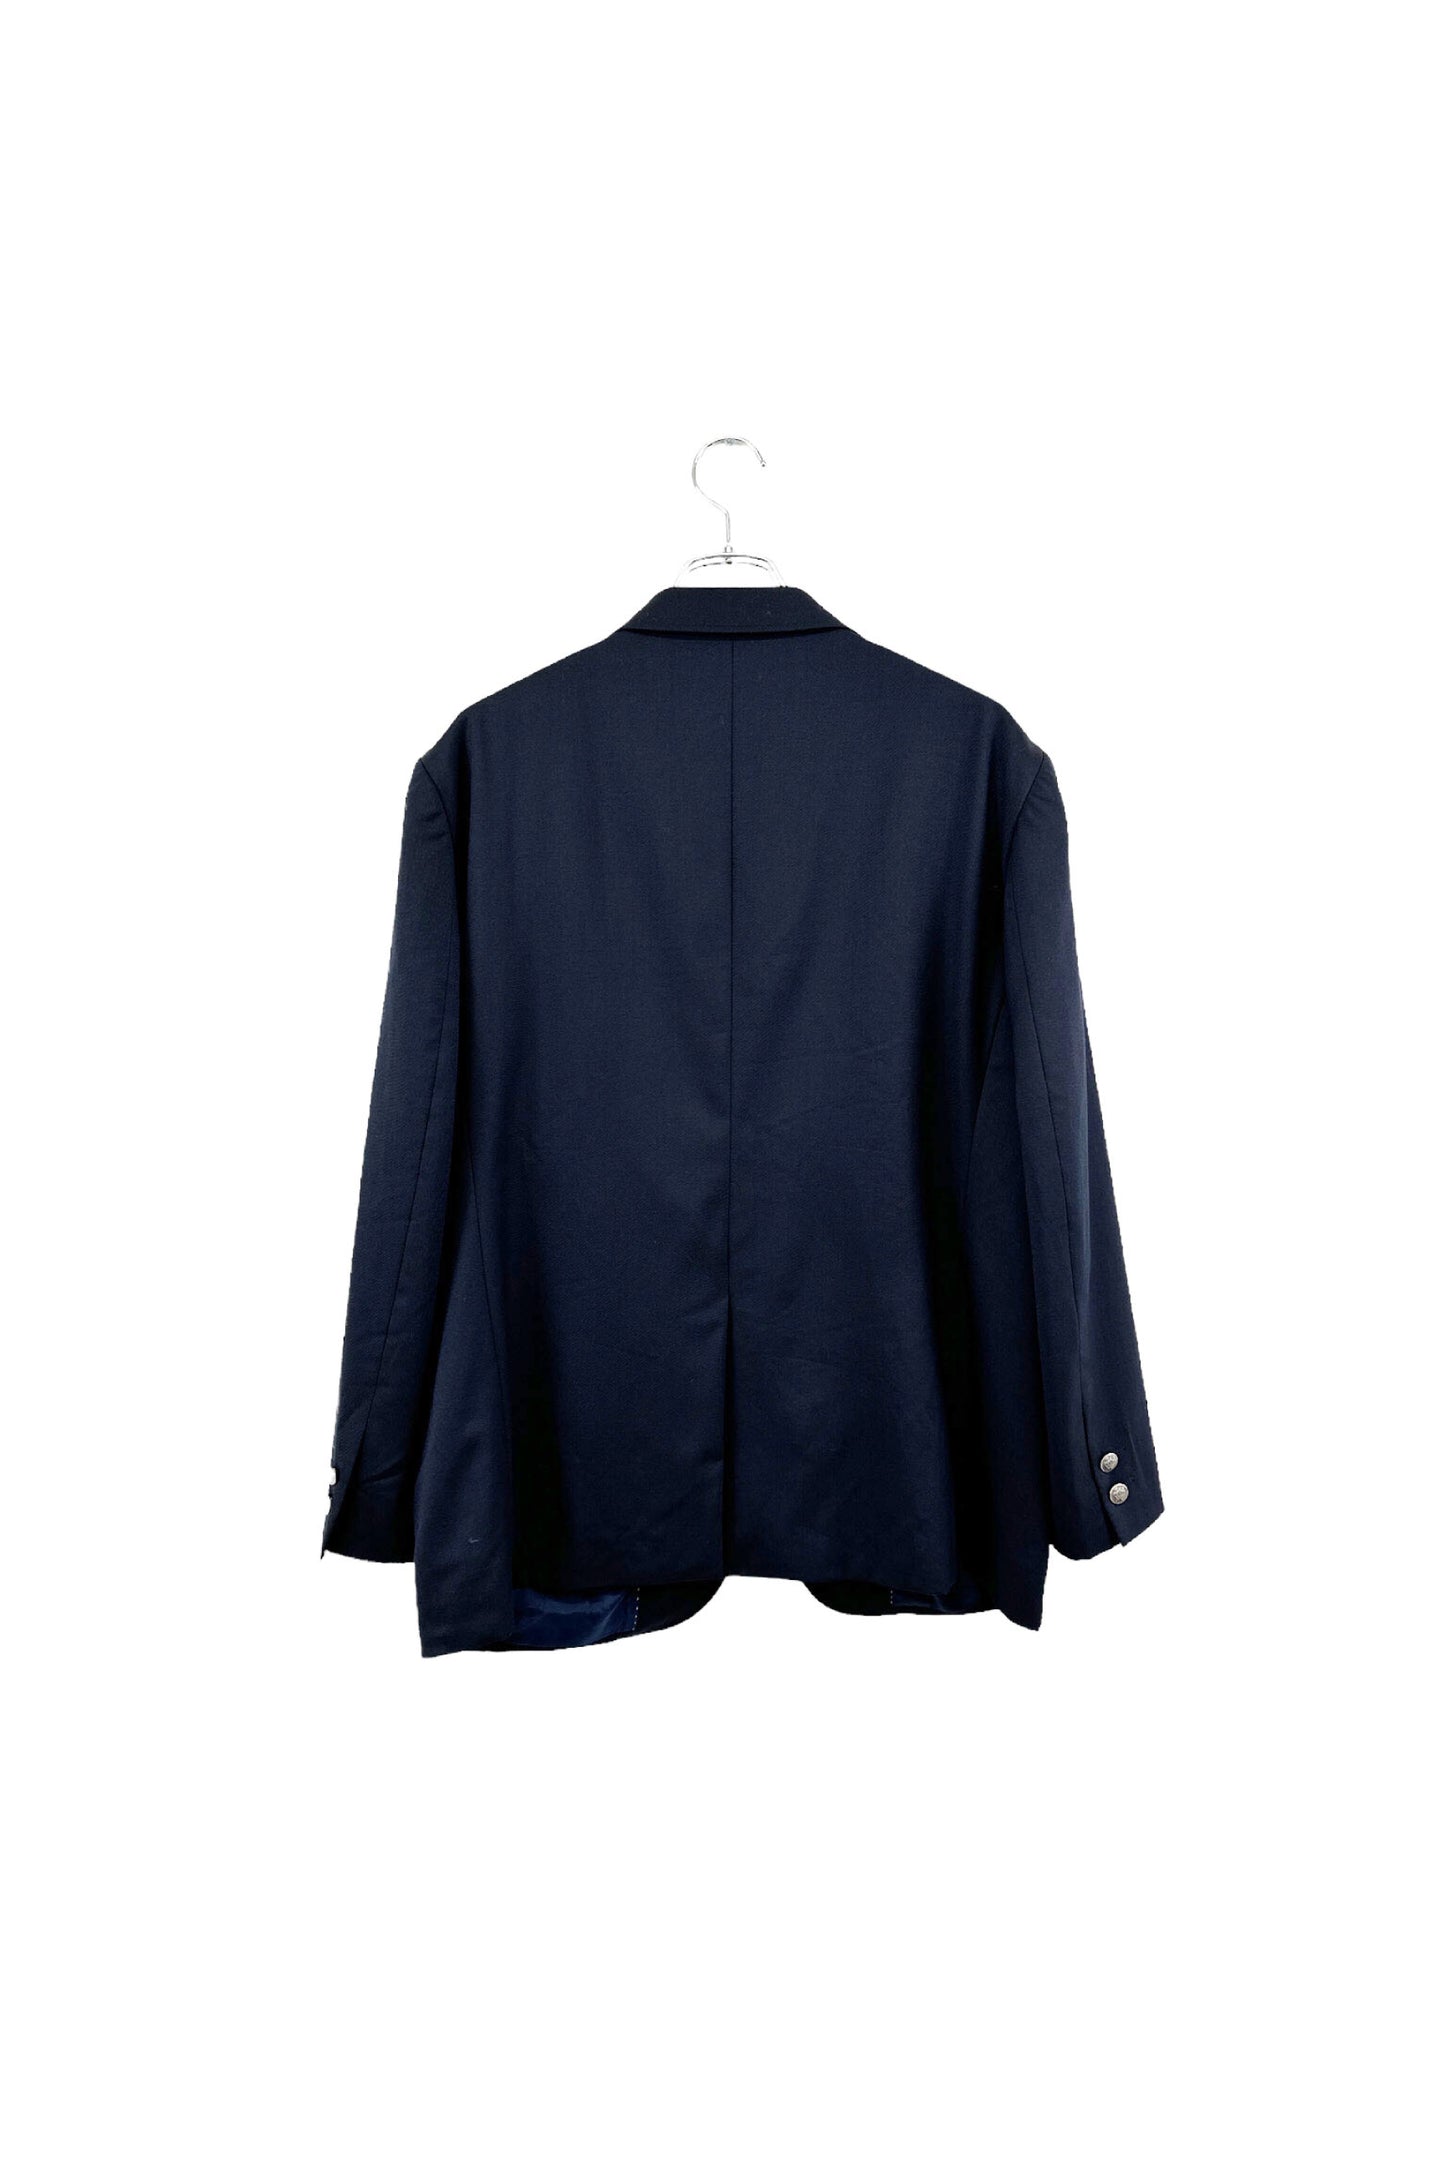 Kent IN TRADITION tailored jacket – ReSCOUNT STORE